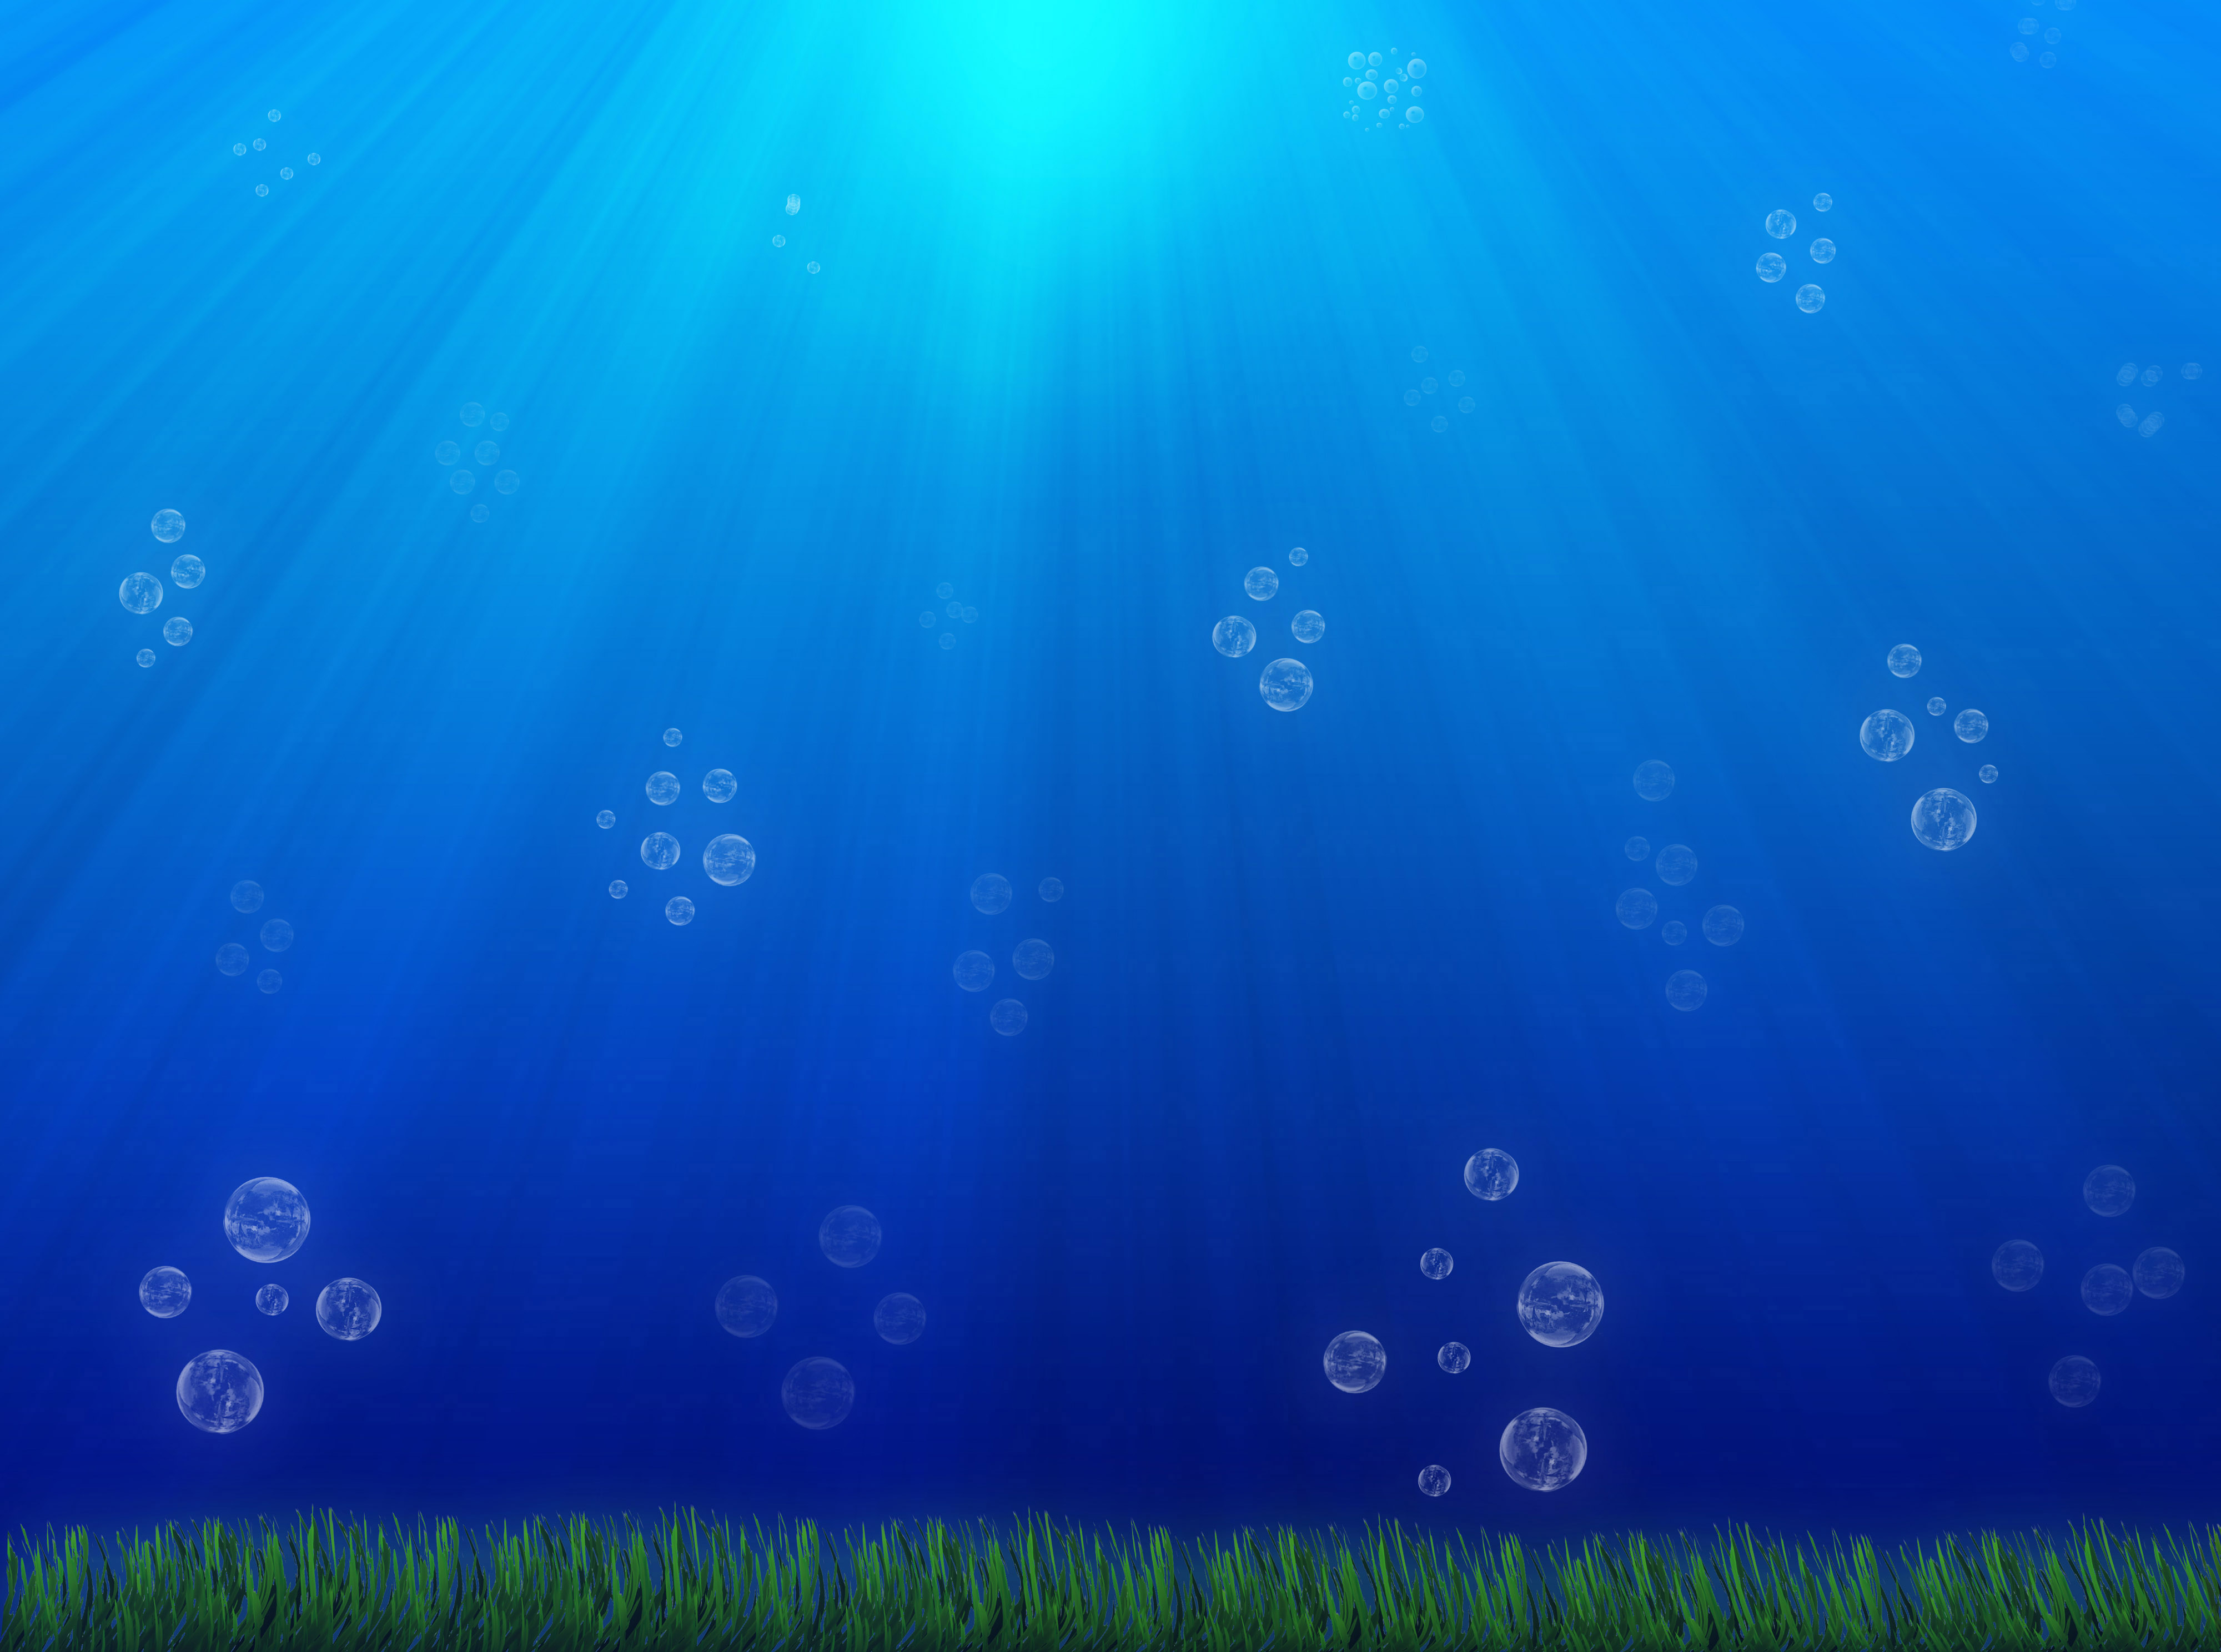 Background illustration of under the sea | www.myfreetextures.com